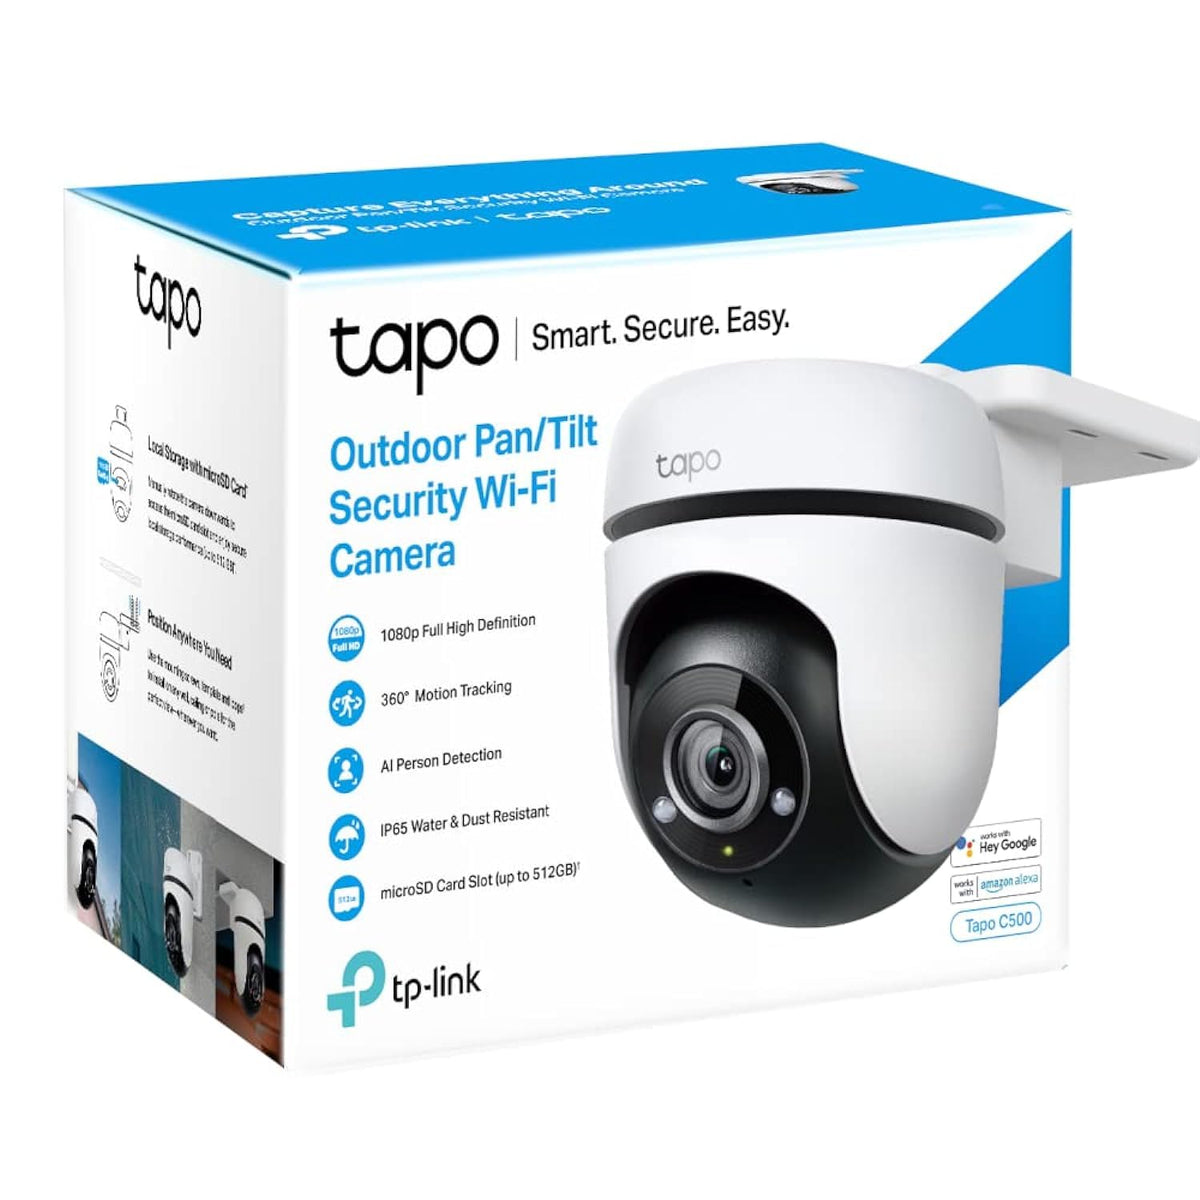 TP-Link Tapo 1080P Outdoor Wired Pan/Tilt Security Wi-Fi Camera, 360° View, Motion Tracking Tapo C500